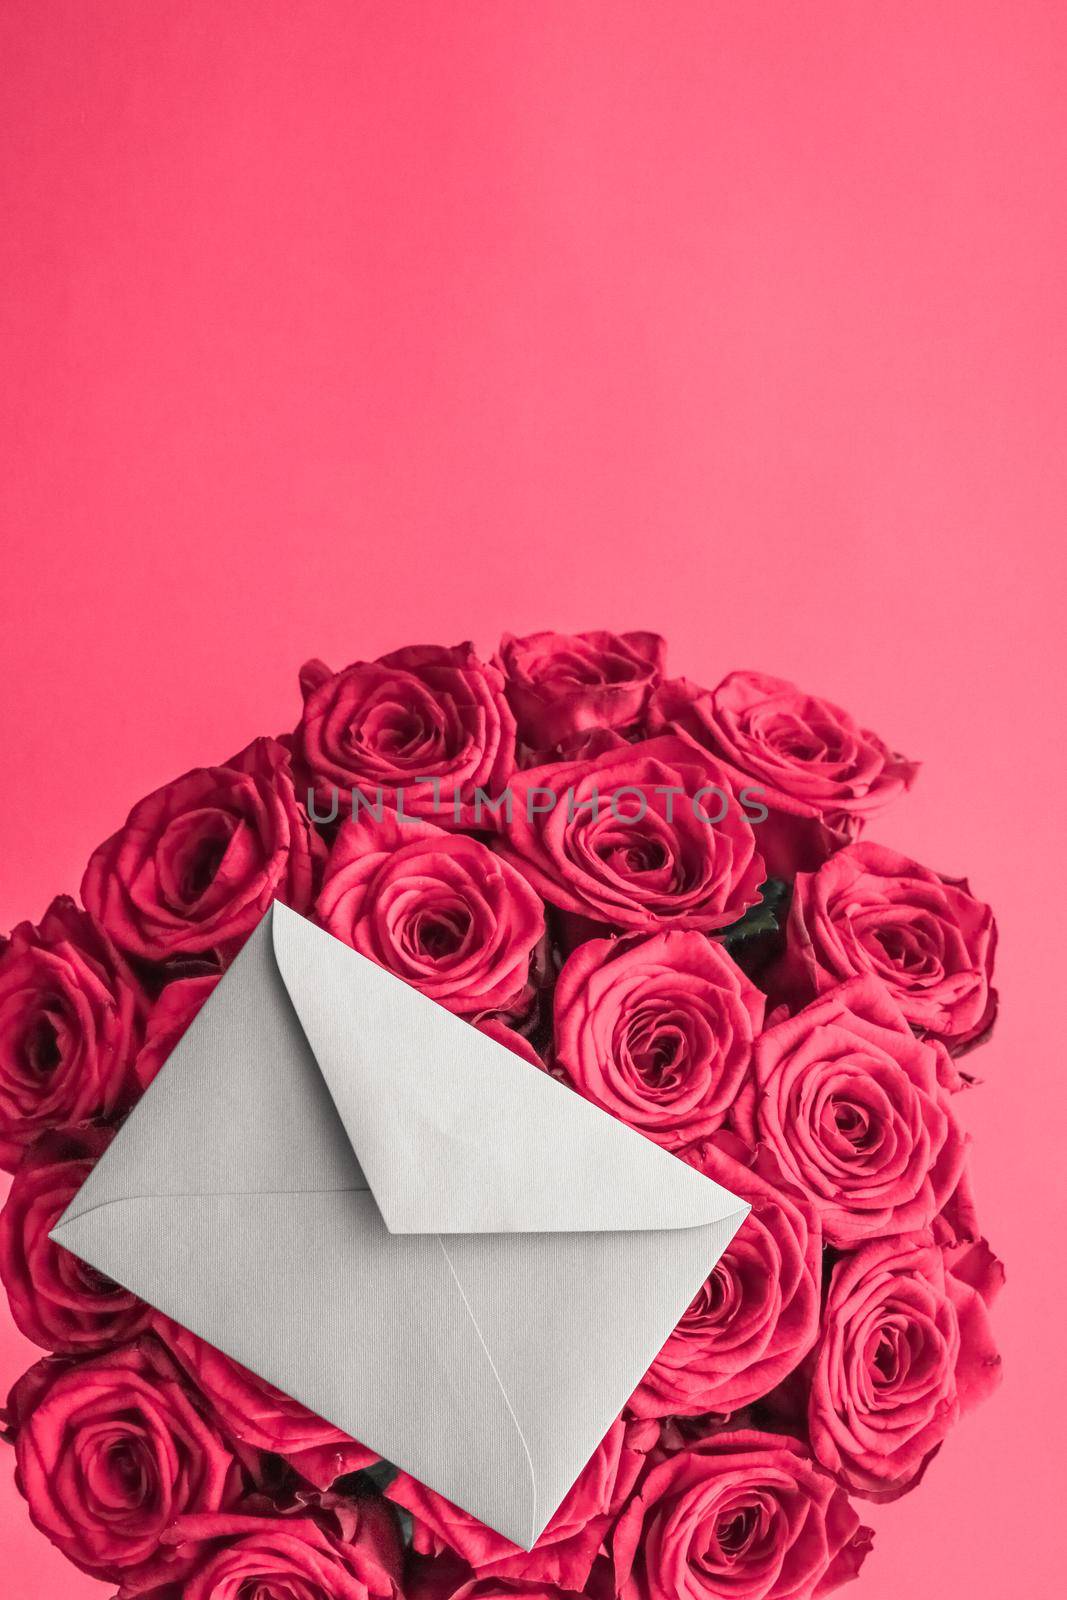 Holidays gift, floral present and happy relationship concept - Love letter and flowers delivery on Valentines Day, luxury bouquet of roses and card on pink background for romantic holiday design